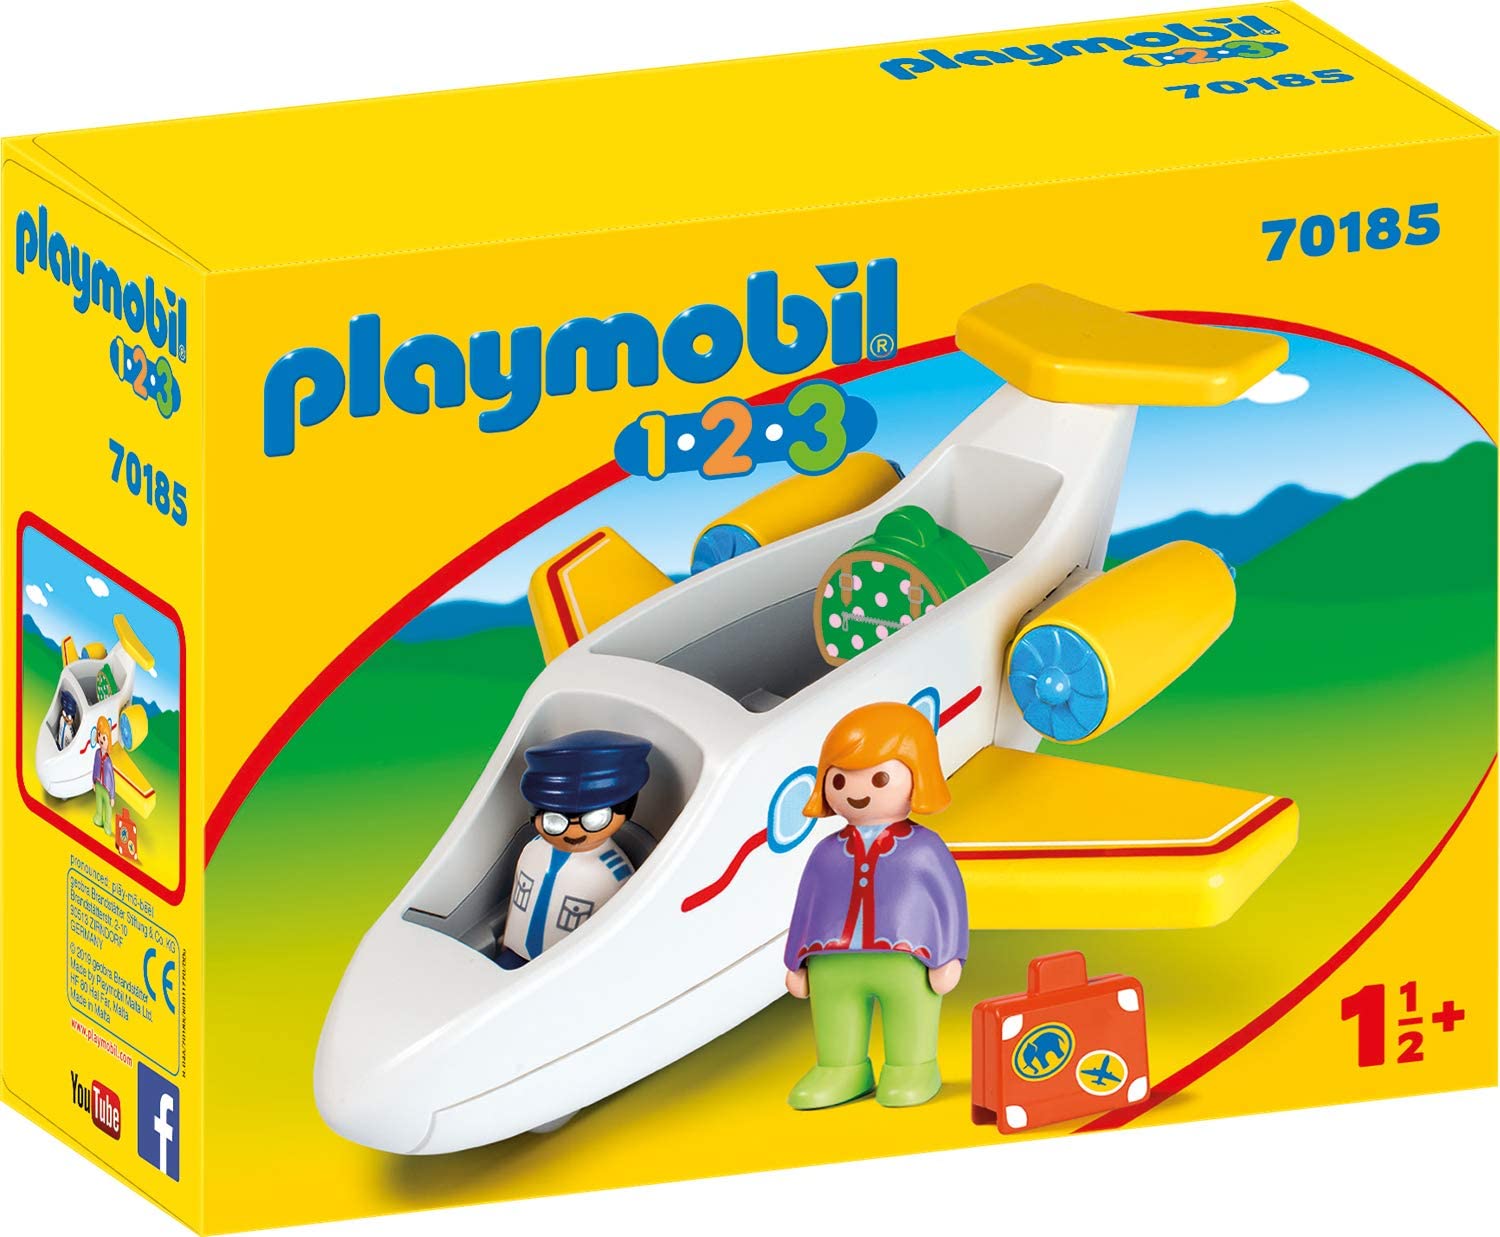 123: Plane with Passenger - Ages 18mth+